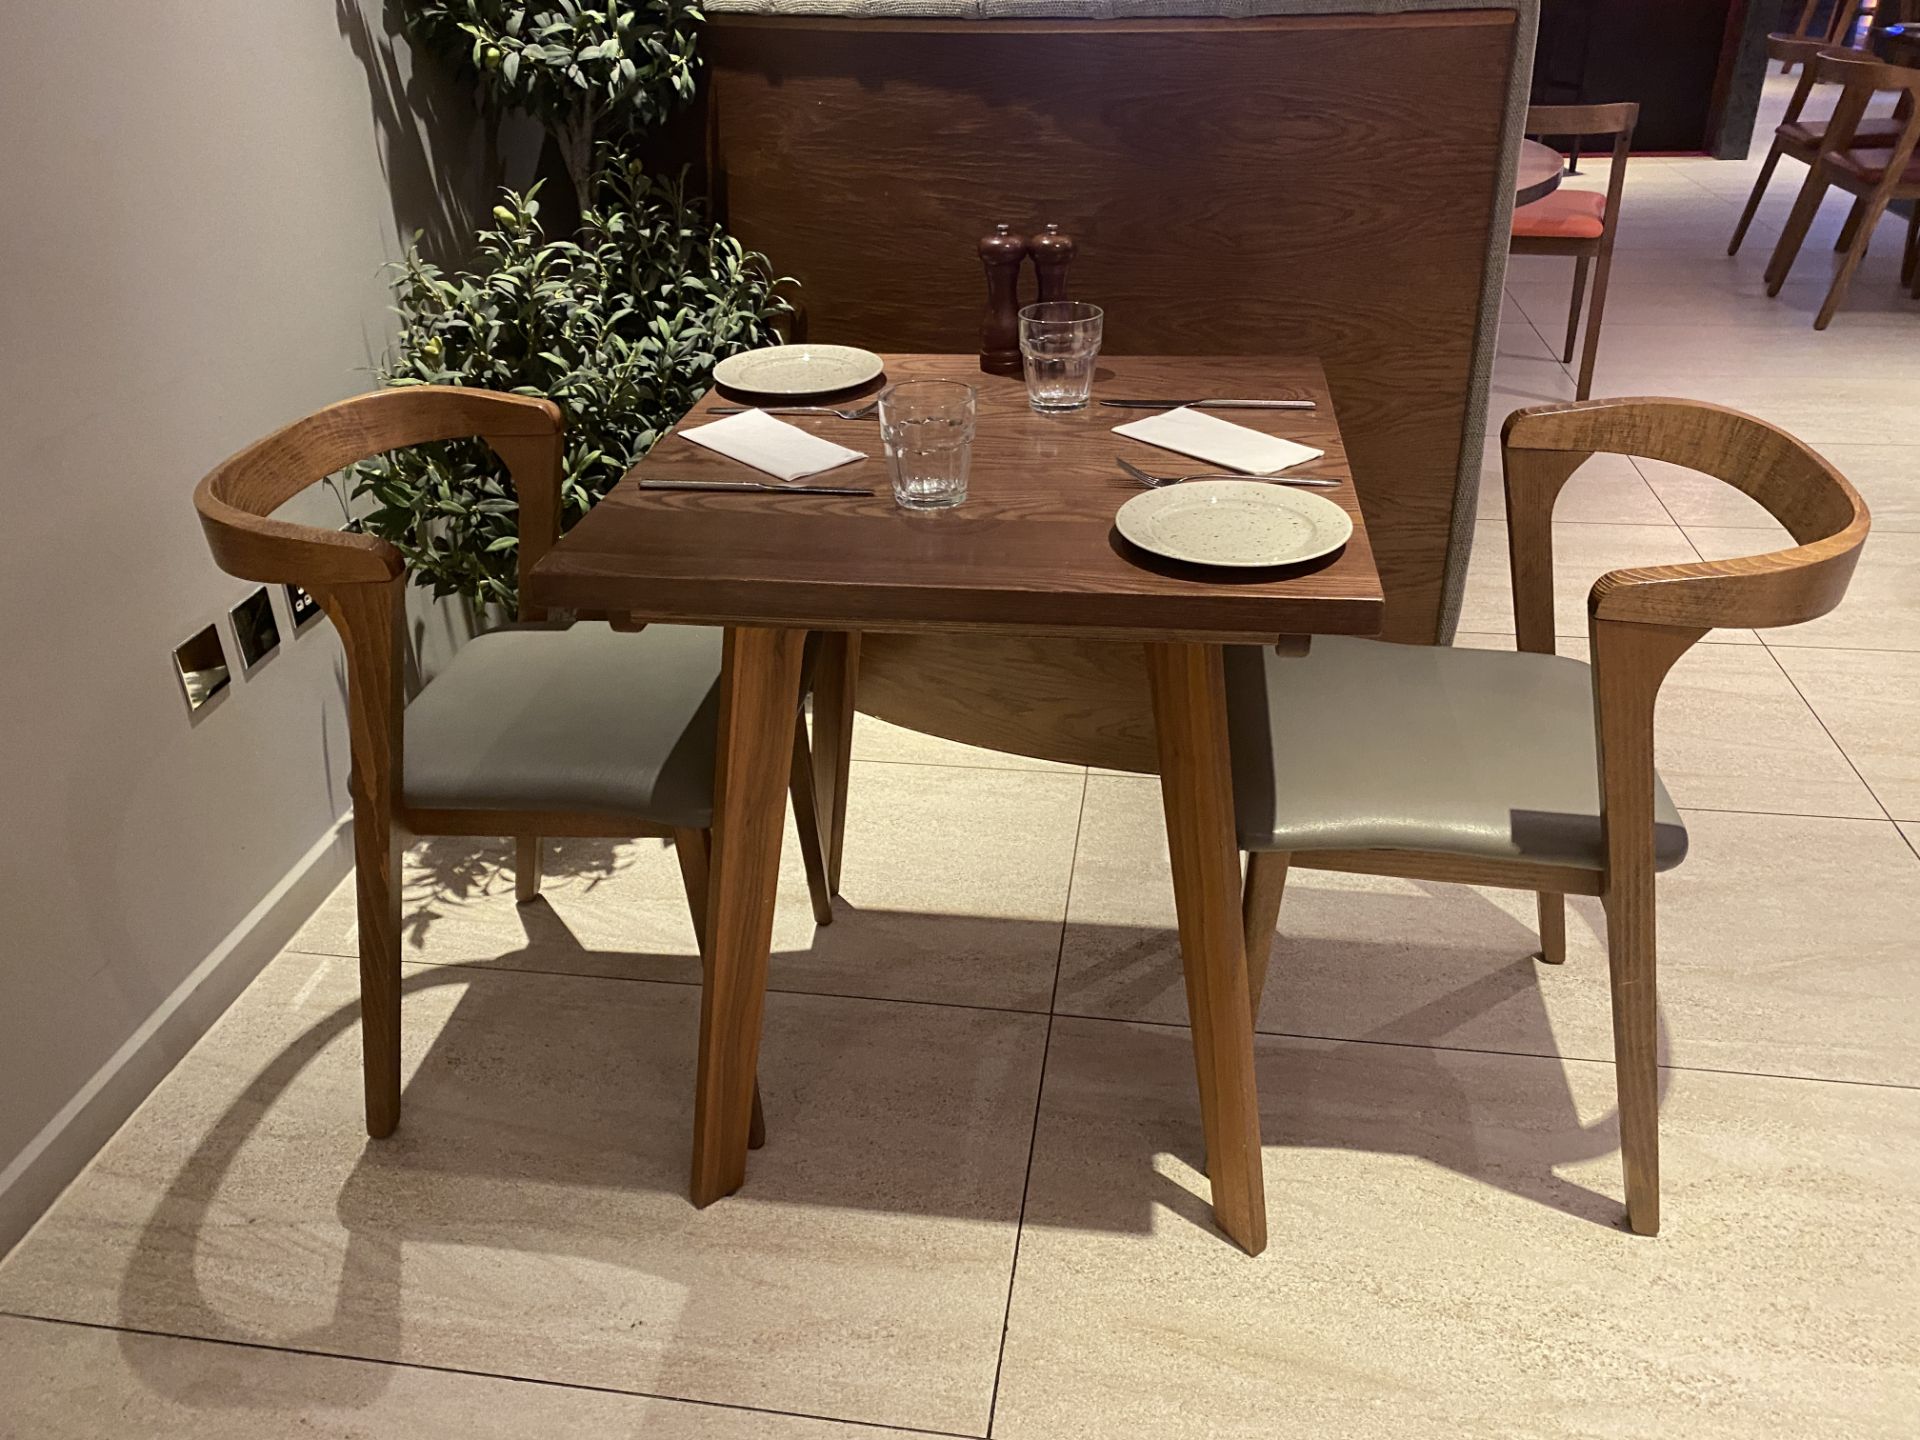 2 Place commercial-grade mid-century style restaurant furniture.